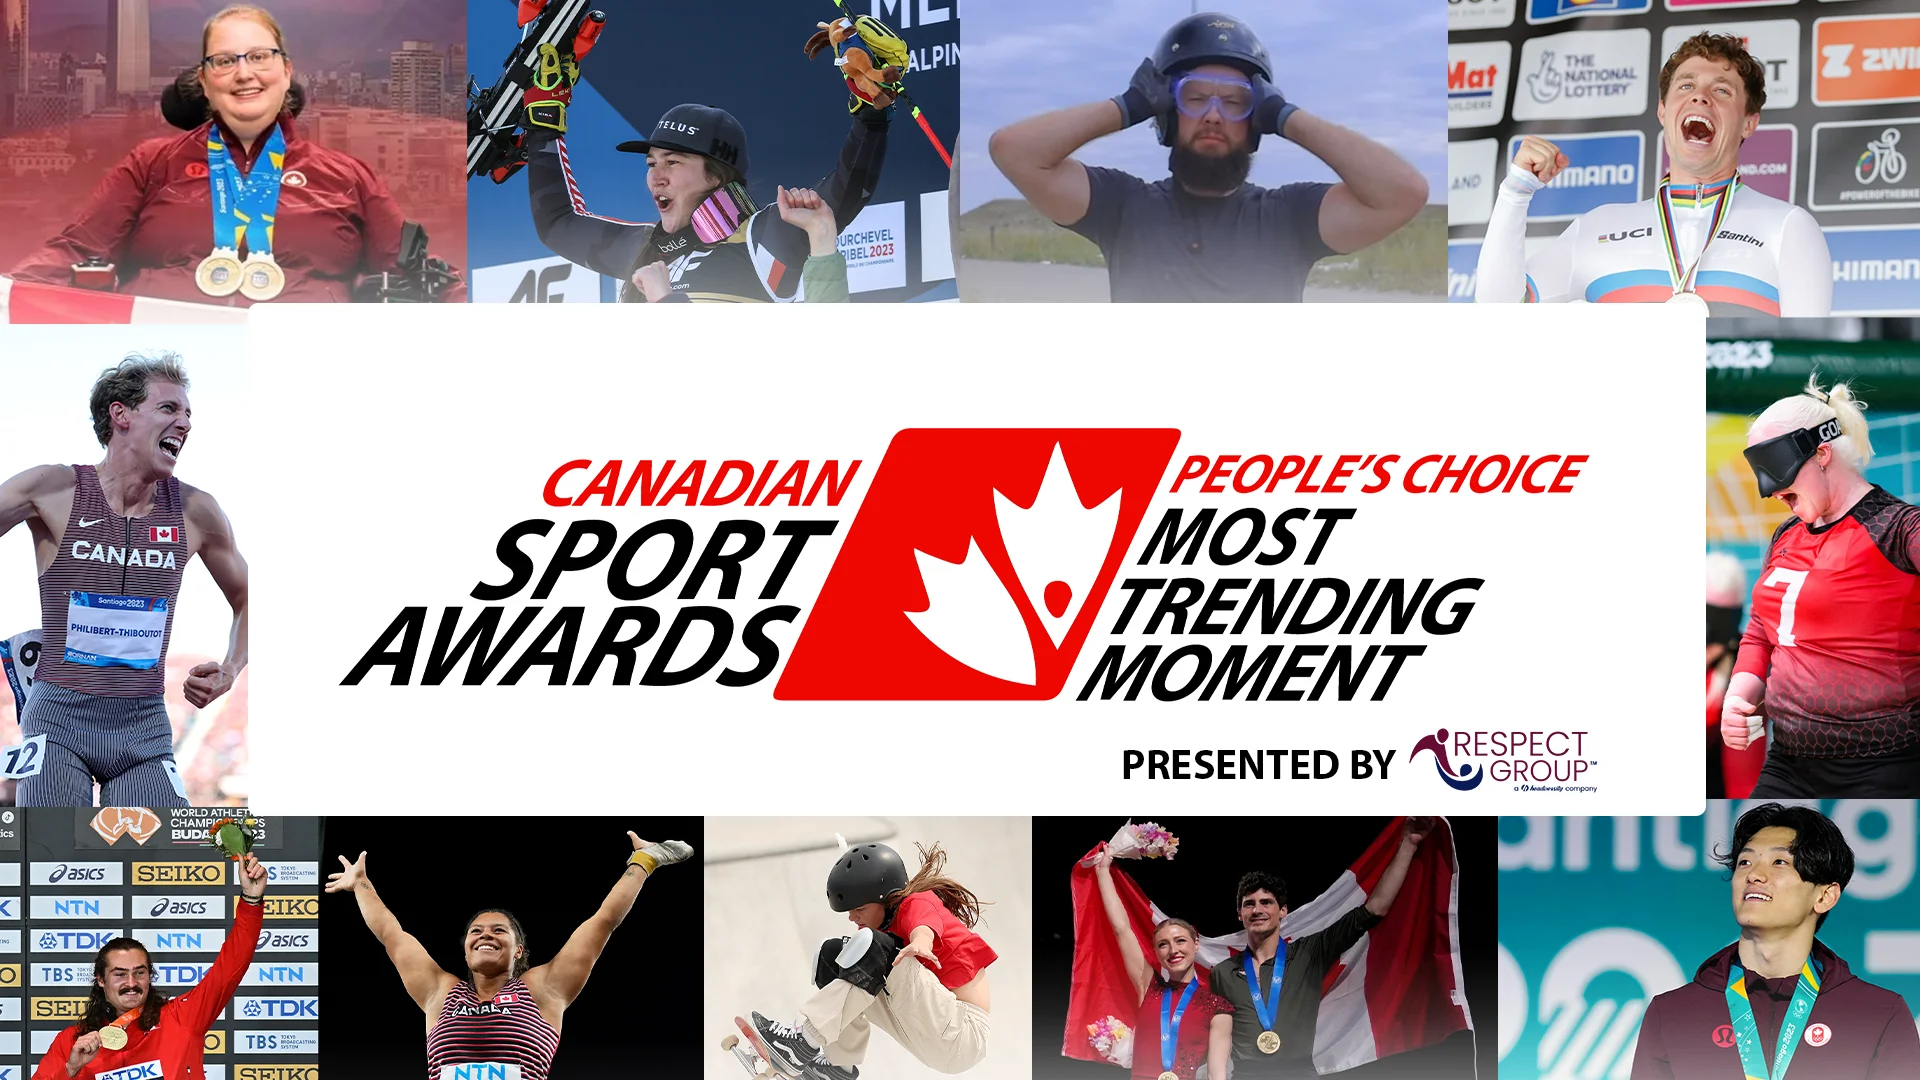 Canadian Sport Awards: Most Trending Moment of the Year Presented by Respect Group